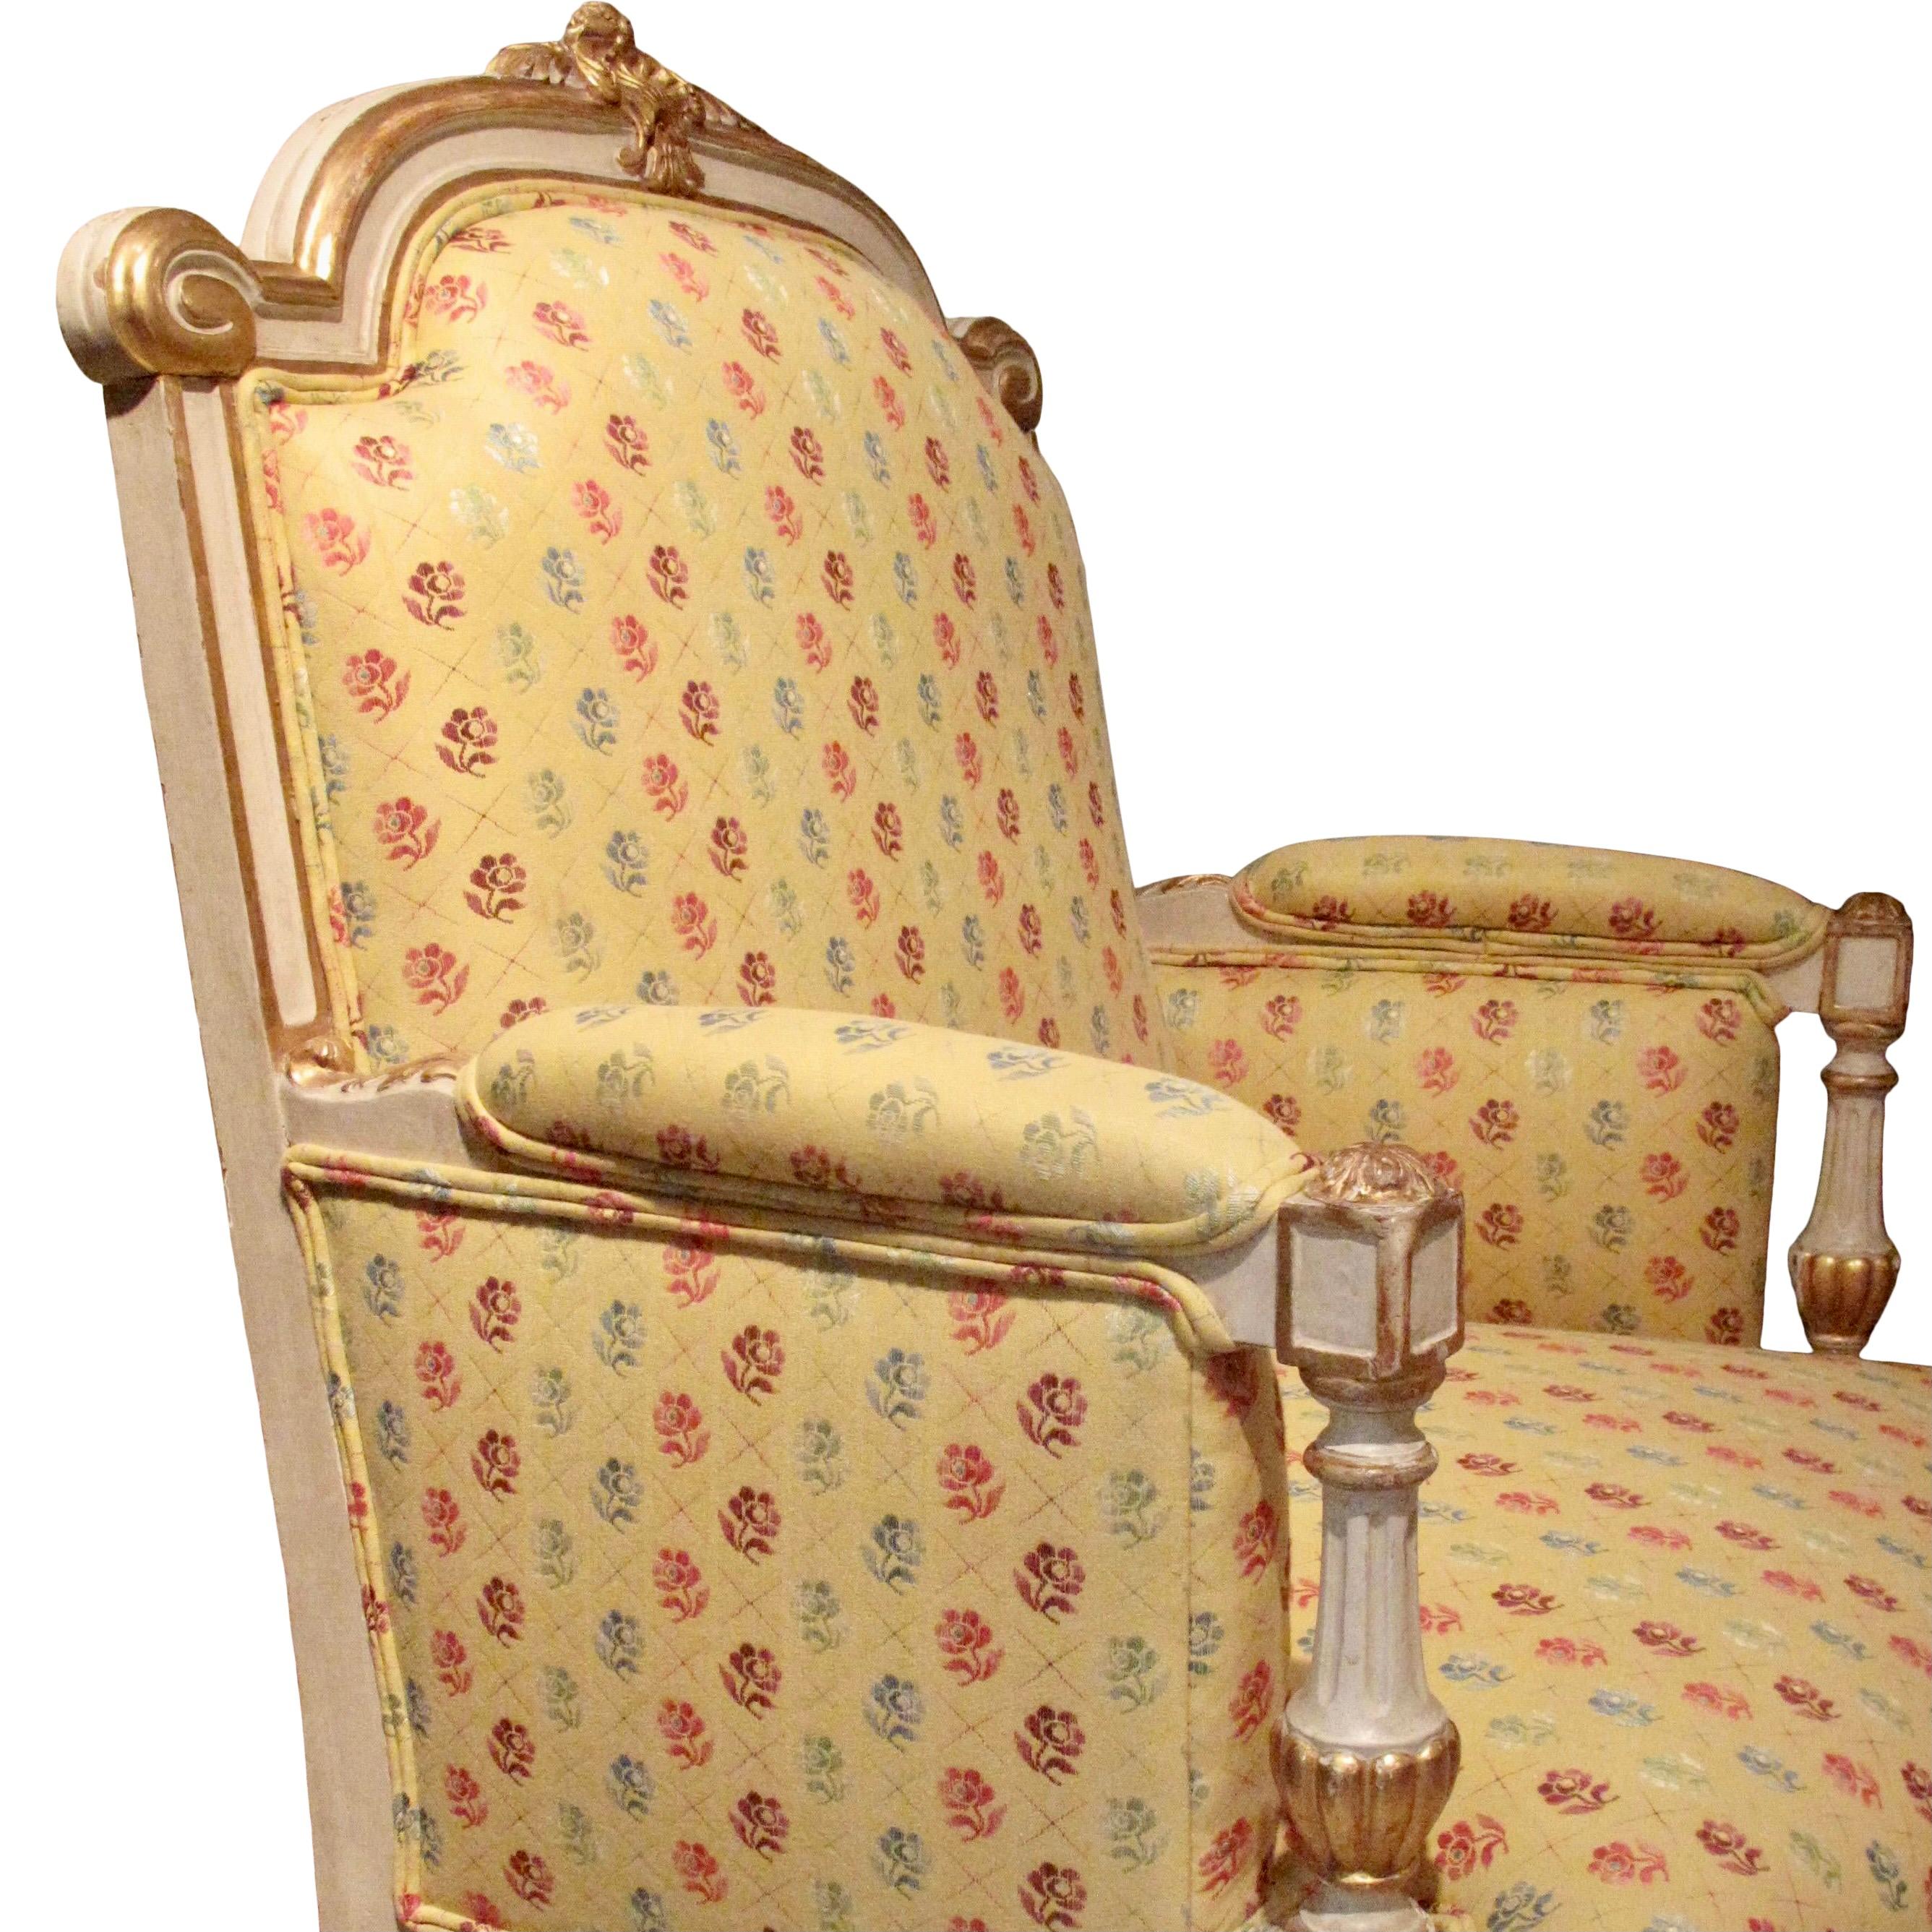 Wood Italian Painted And Parcel Gilt Marquise Armchair, 19th Century For Sale